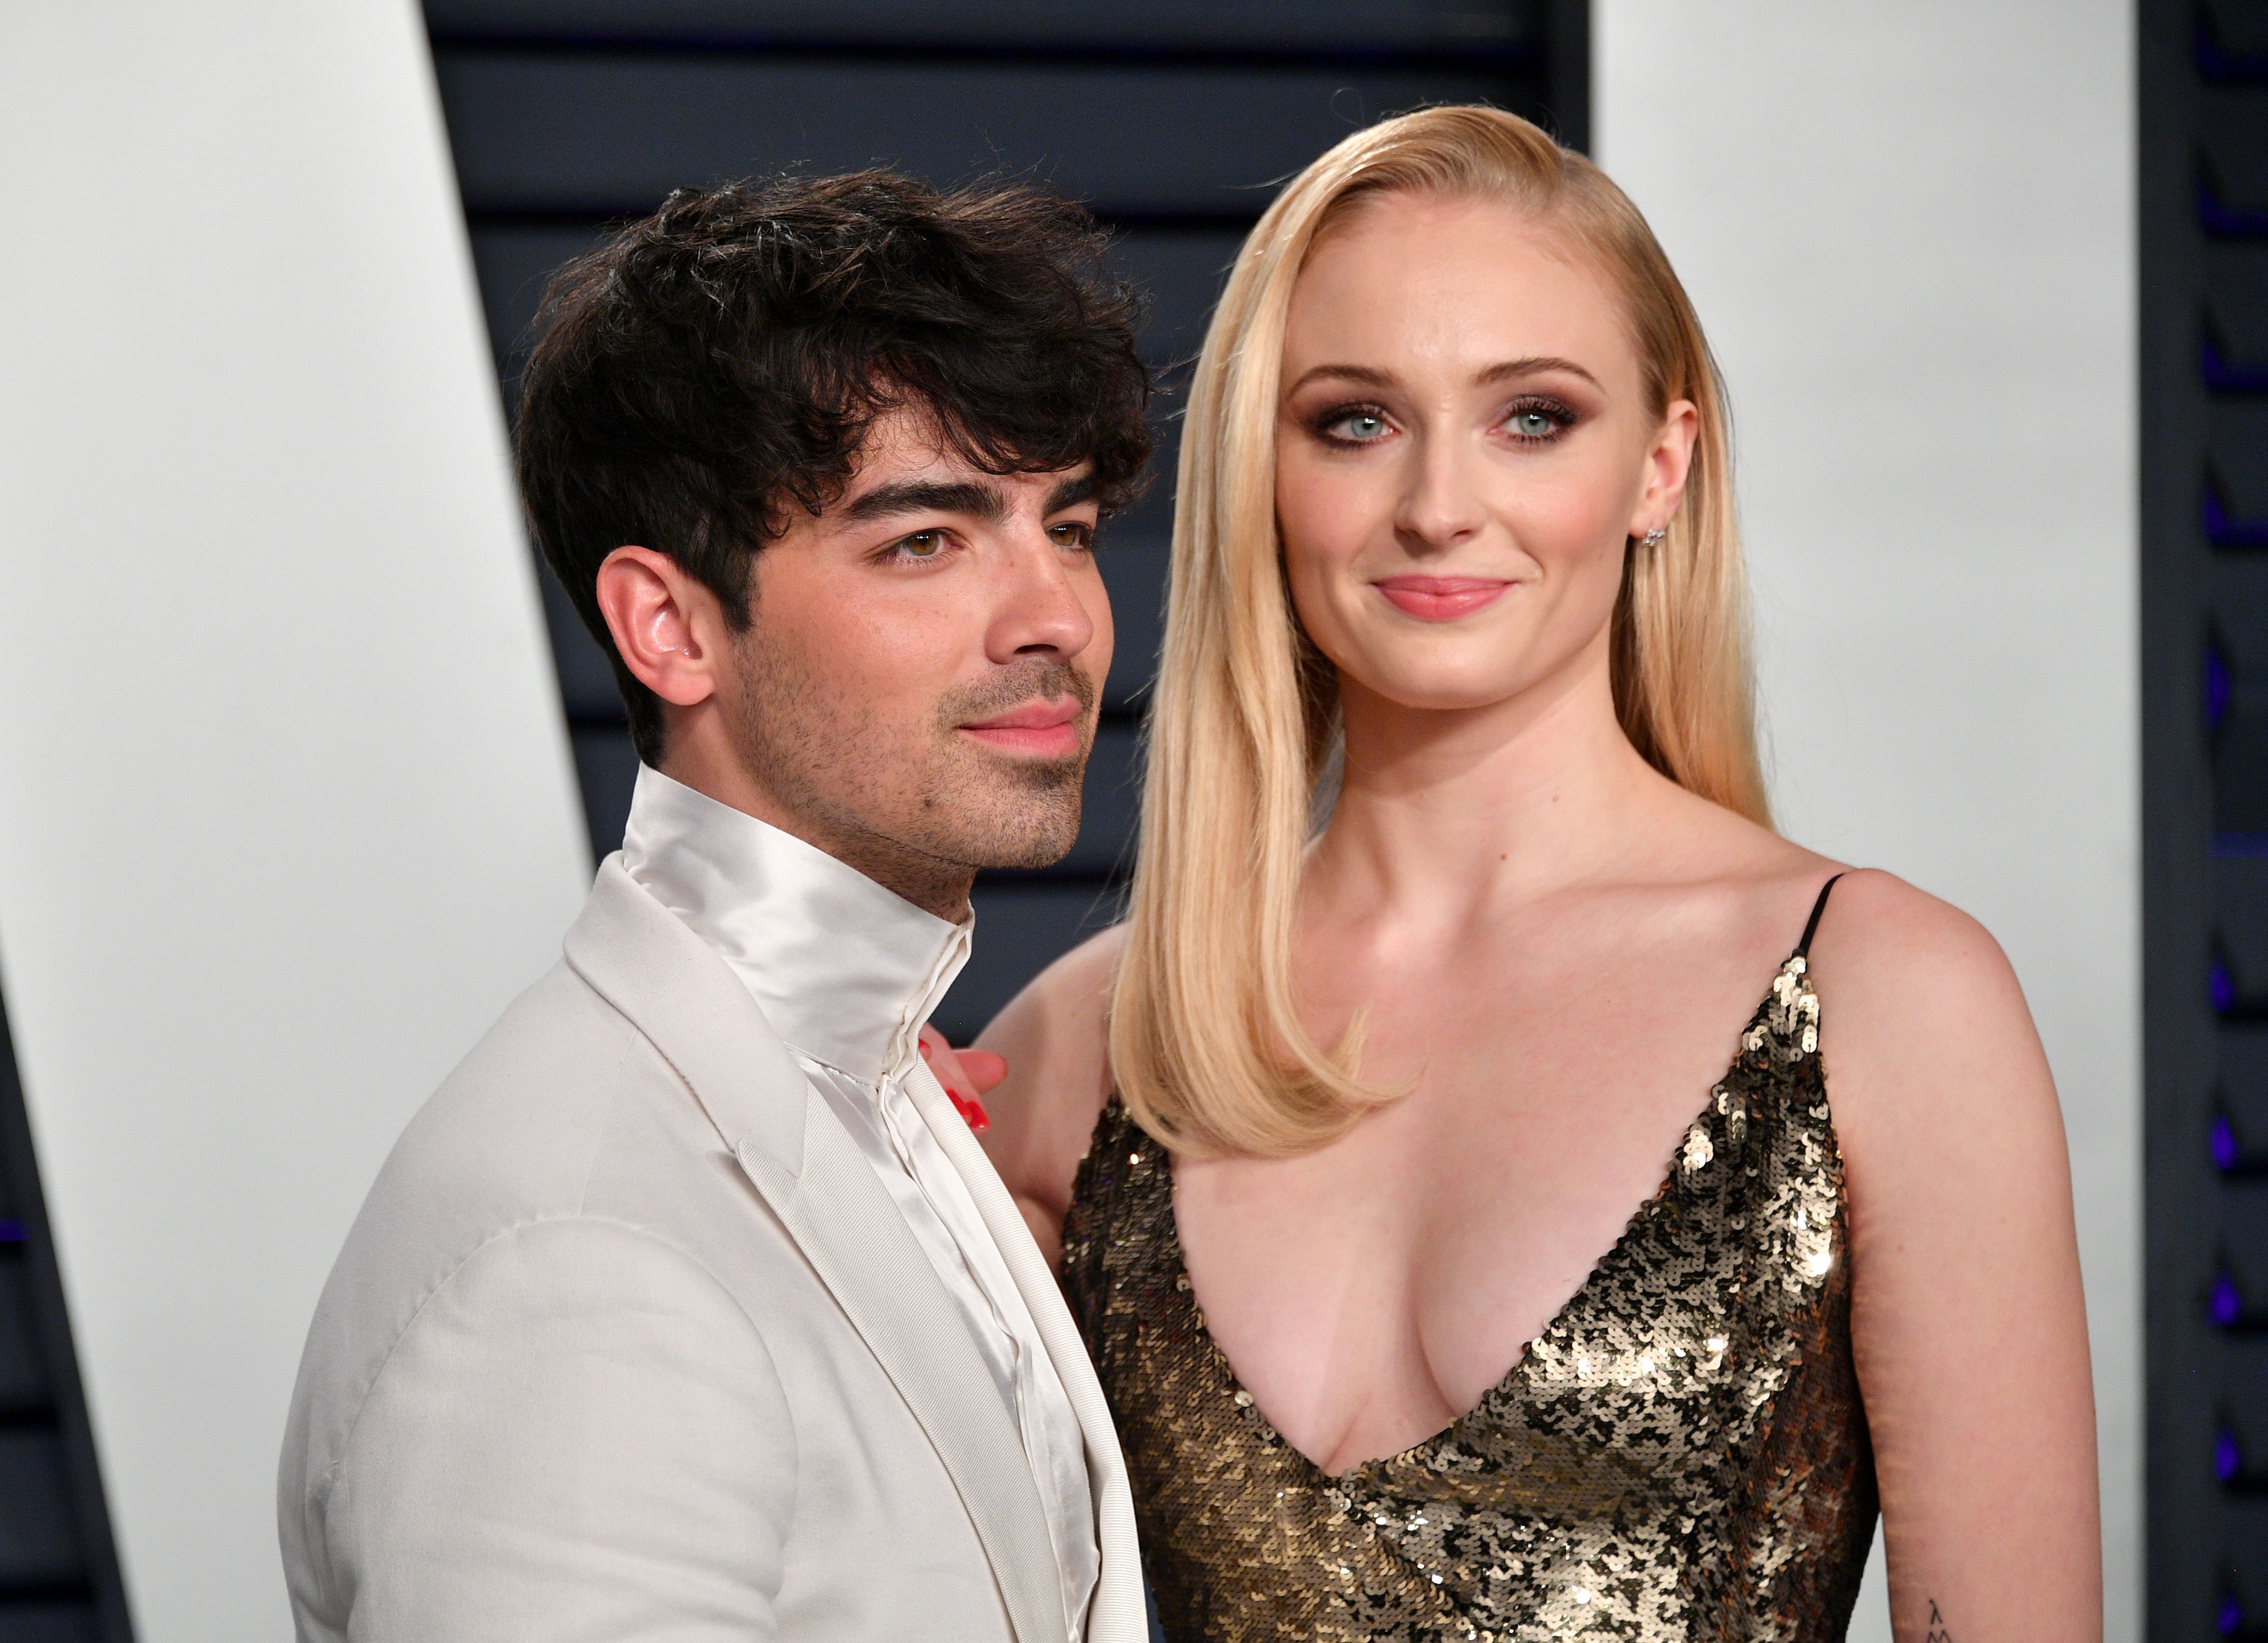 Joe Jonas and Sophie Turner attend the 2019 Vanity Fair Oscar Party at Wallis Annenberg Center for the Performing Arts in Beverly Hills, California on February 24, 2019 | Source: Getty Images